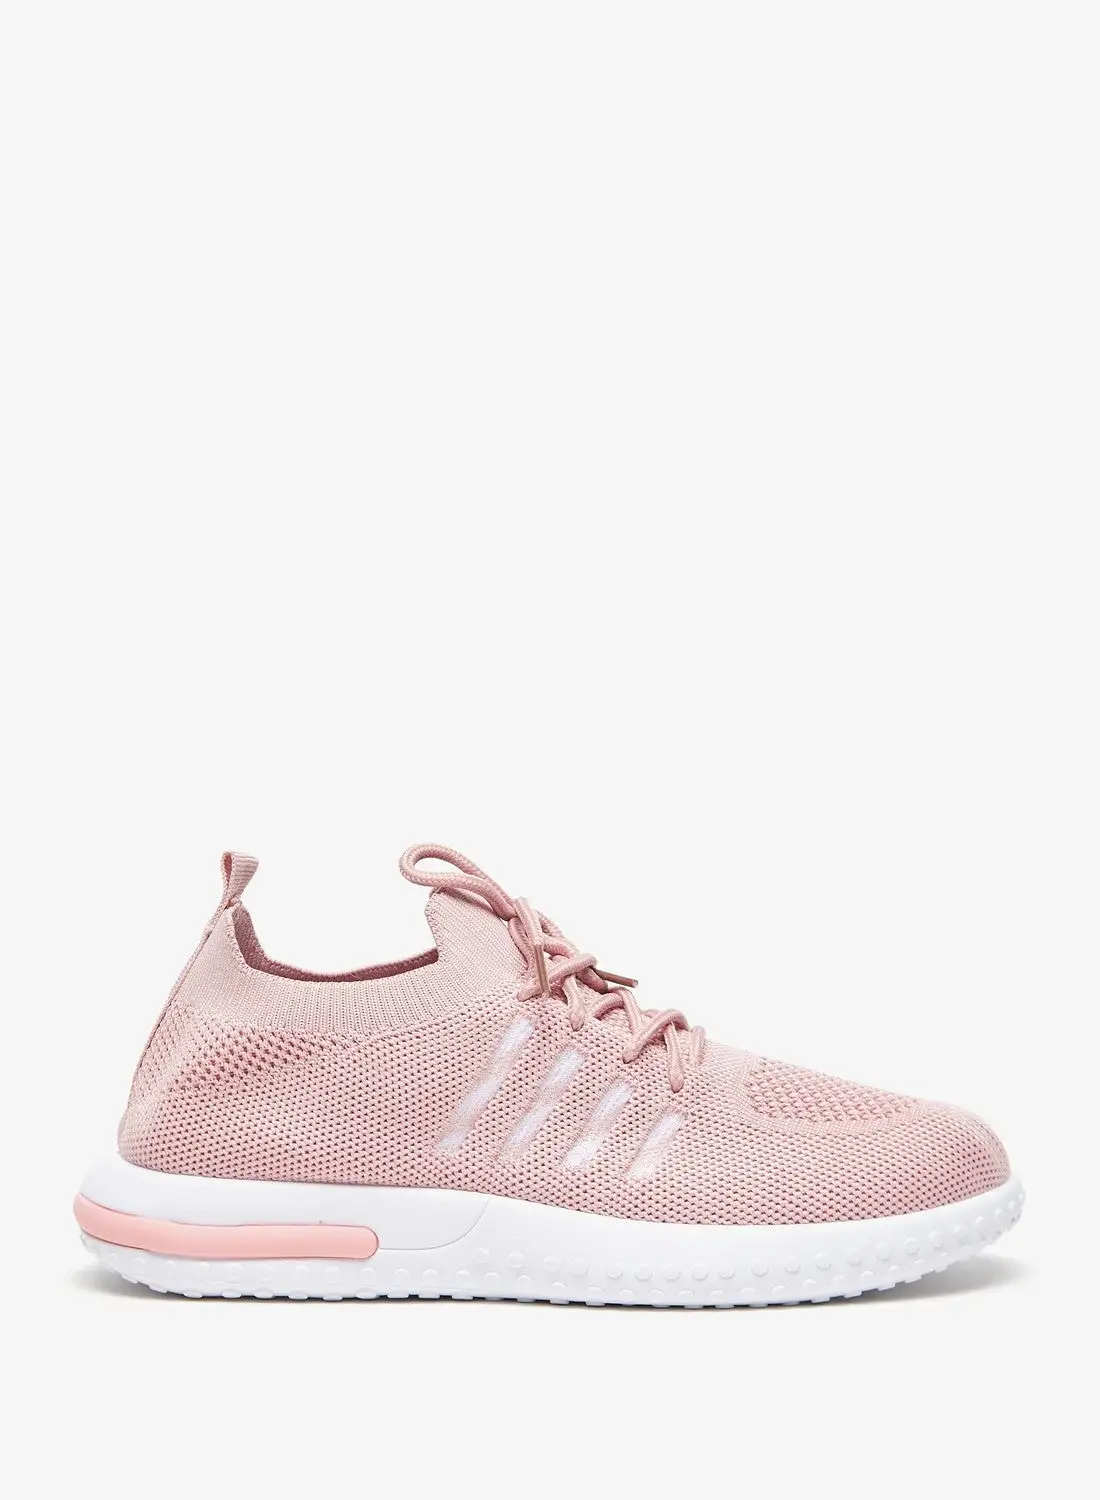 shoexpress Girls Textured Running Shoes with Lace Up Closure and Pull Tabs Pink